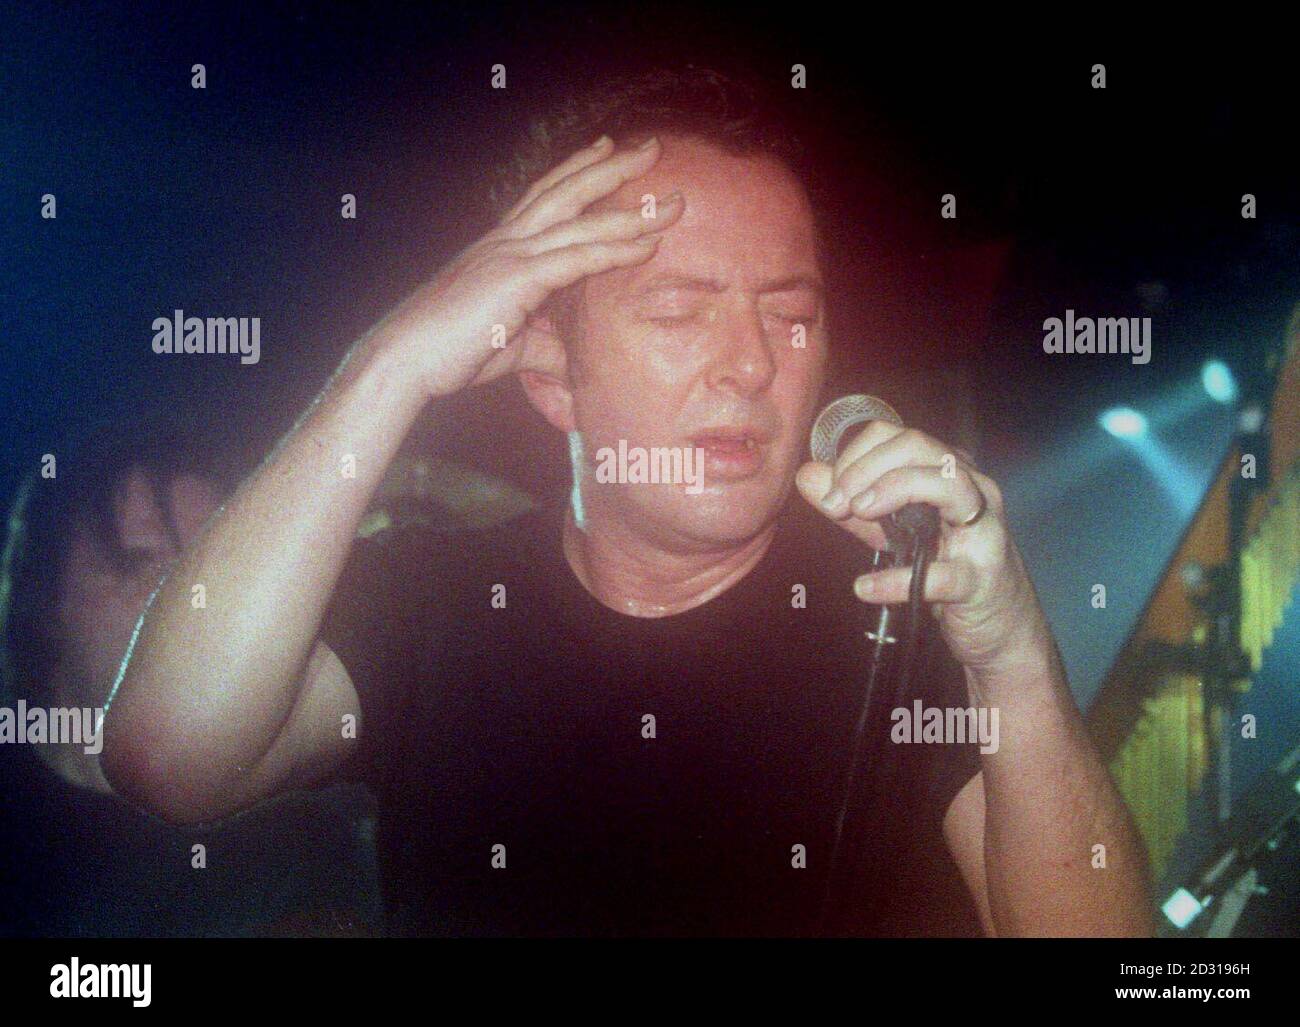 Joe Strummer, formerly of the rock group The Clash, performing at the launch of the Q awards at the 100 club, London Stock Photo